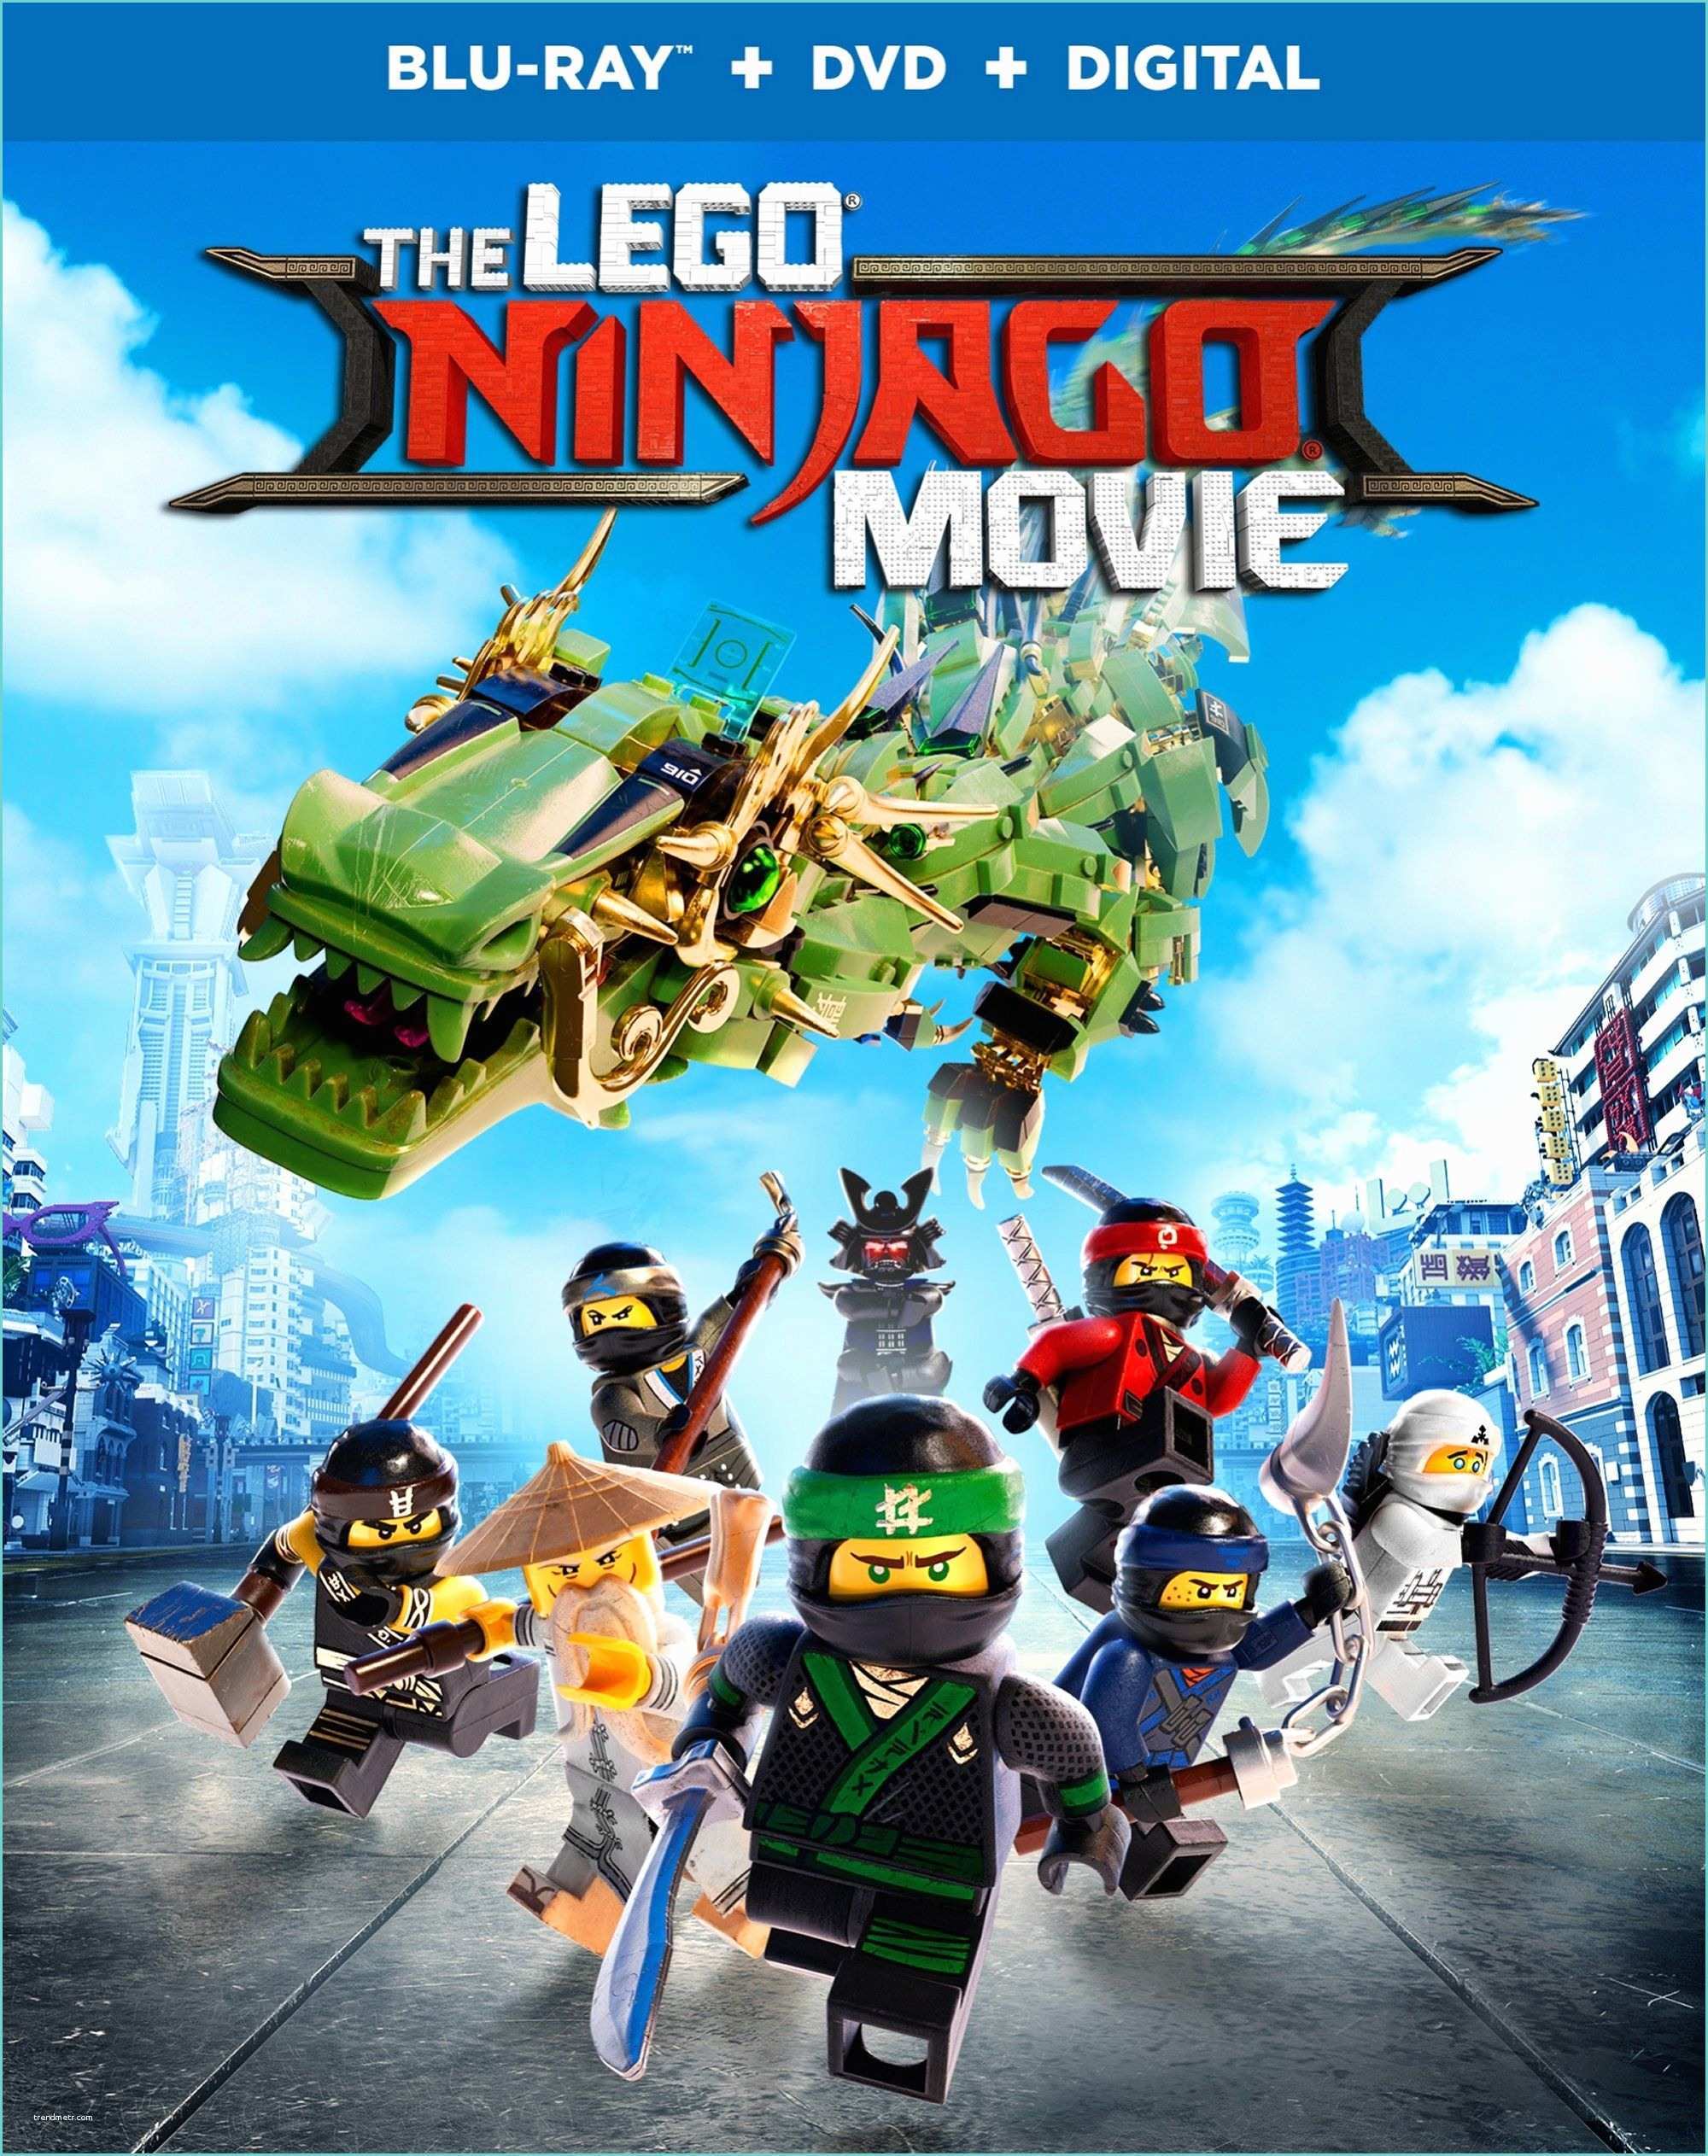 Allposters Return Policy the Lego Ninjago Movie Giveaways Pinterest